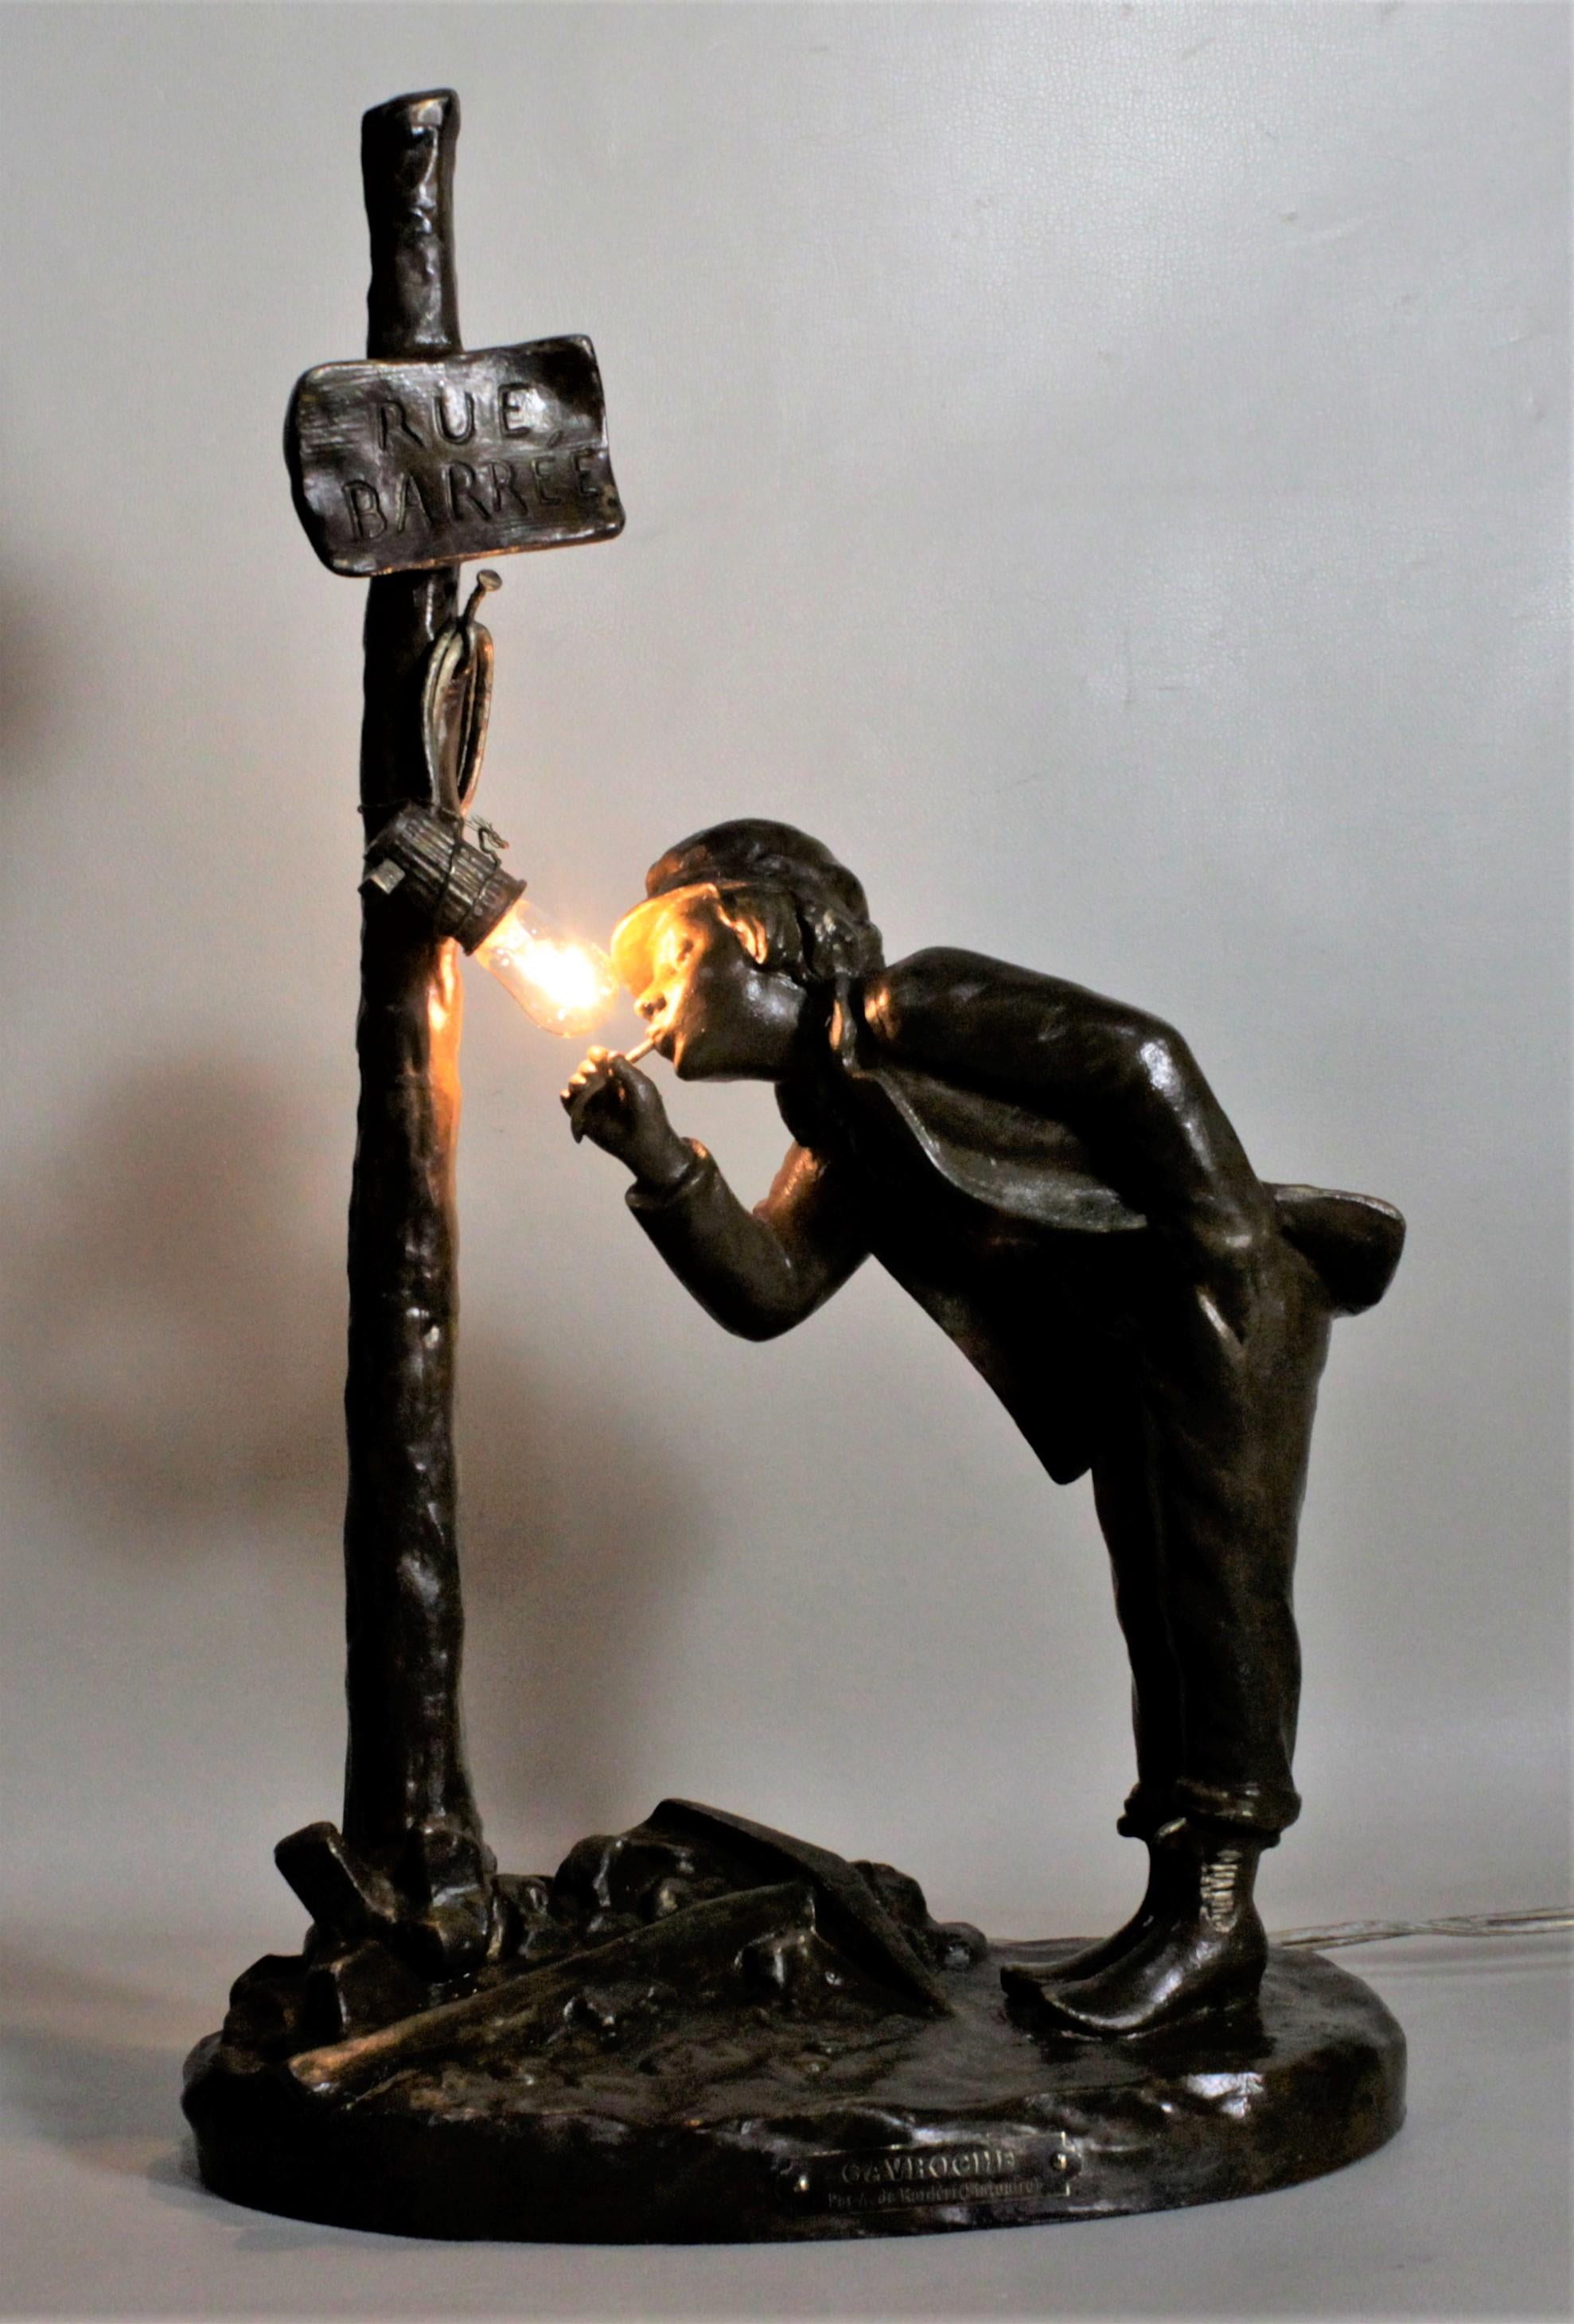 This antique patinated bronze cast spelter table lamp was designed by A. Renieri and made in France in circa 1890 in the Victorian style. The casting is quite detailed and is entitled 